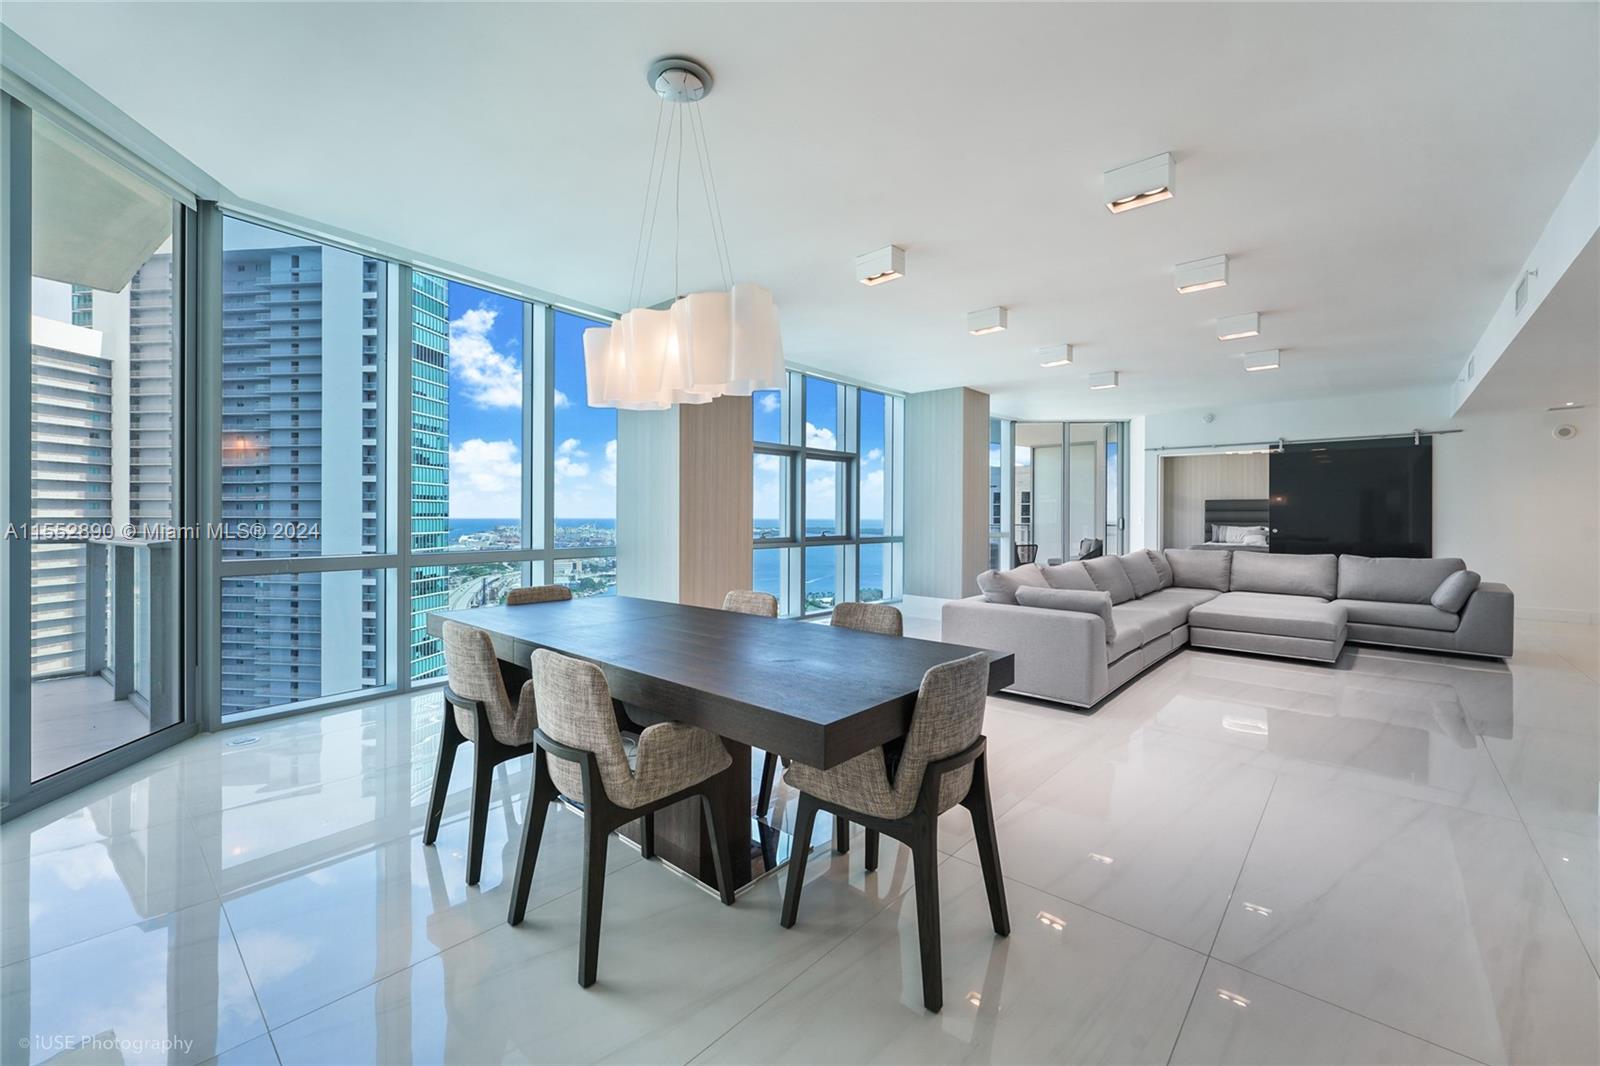 Combined residence opportunity available for RENT at Paramount Miami Worldcenter. Enjoy an expansive unit with 2,800+ SF of total living space and two balconies, including a Chef’s eat-in-kitchen with oversized island & stainless steel appliances. Immerse in an open floor plan with spacious living areas flooded with natural sunlight throughout and two master bedrooms with their own bathrooms. Building offers a rooftop and five-star amenities including resort-style pools, fitness center, spa, basketball court, racquetball court, business center, game room, golf simulator, soccer field, dog park, tennis courts, playrooms, and much more. Miami Worldcenter, one of the largest urban developments in the U.S., offers a mix of retail, residential, office, hospitality, and entertainment components.